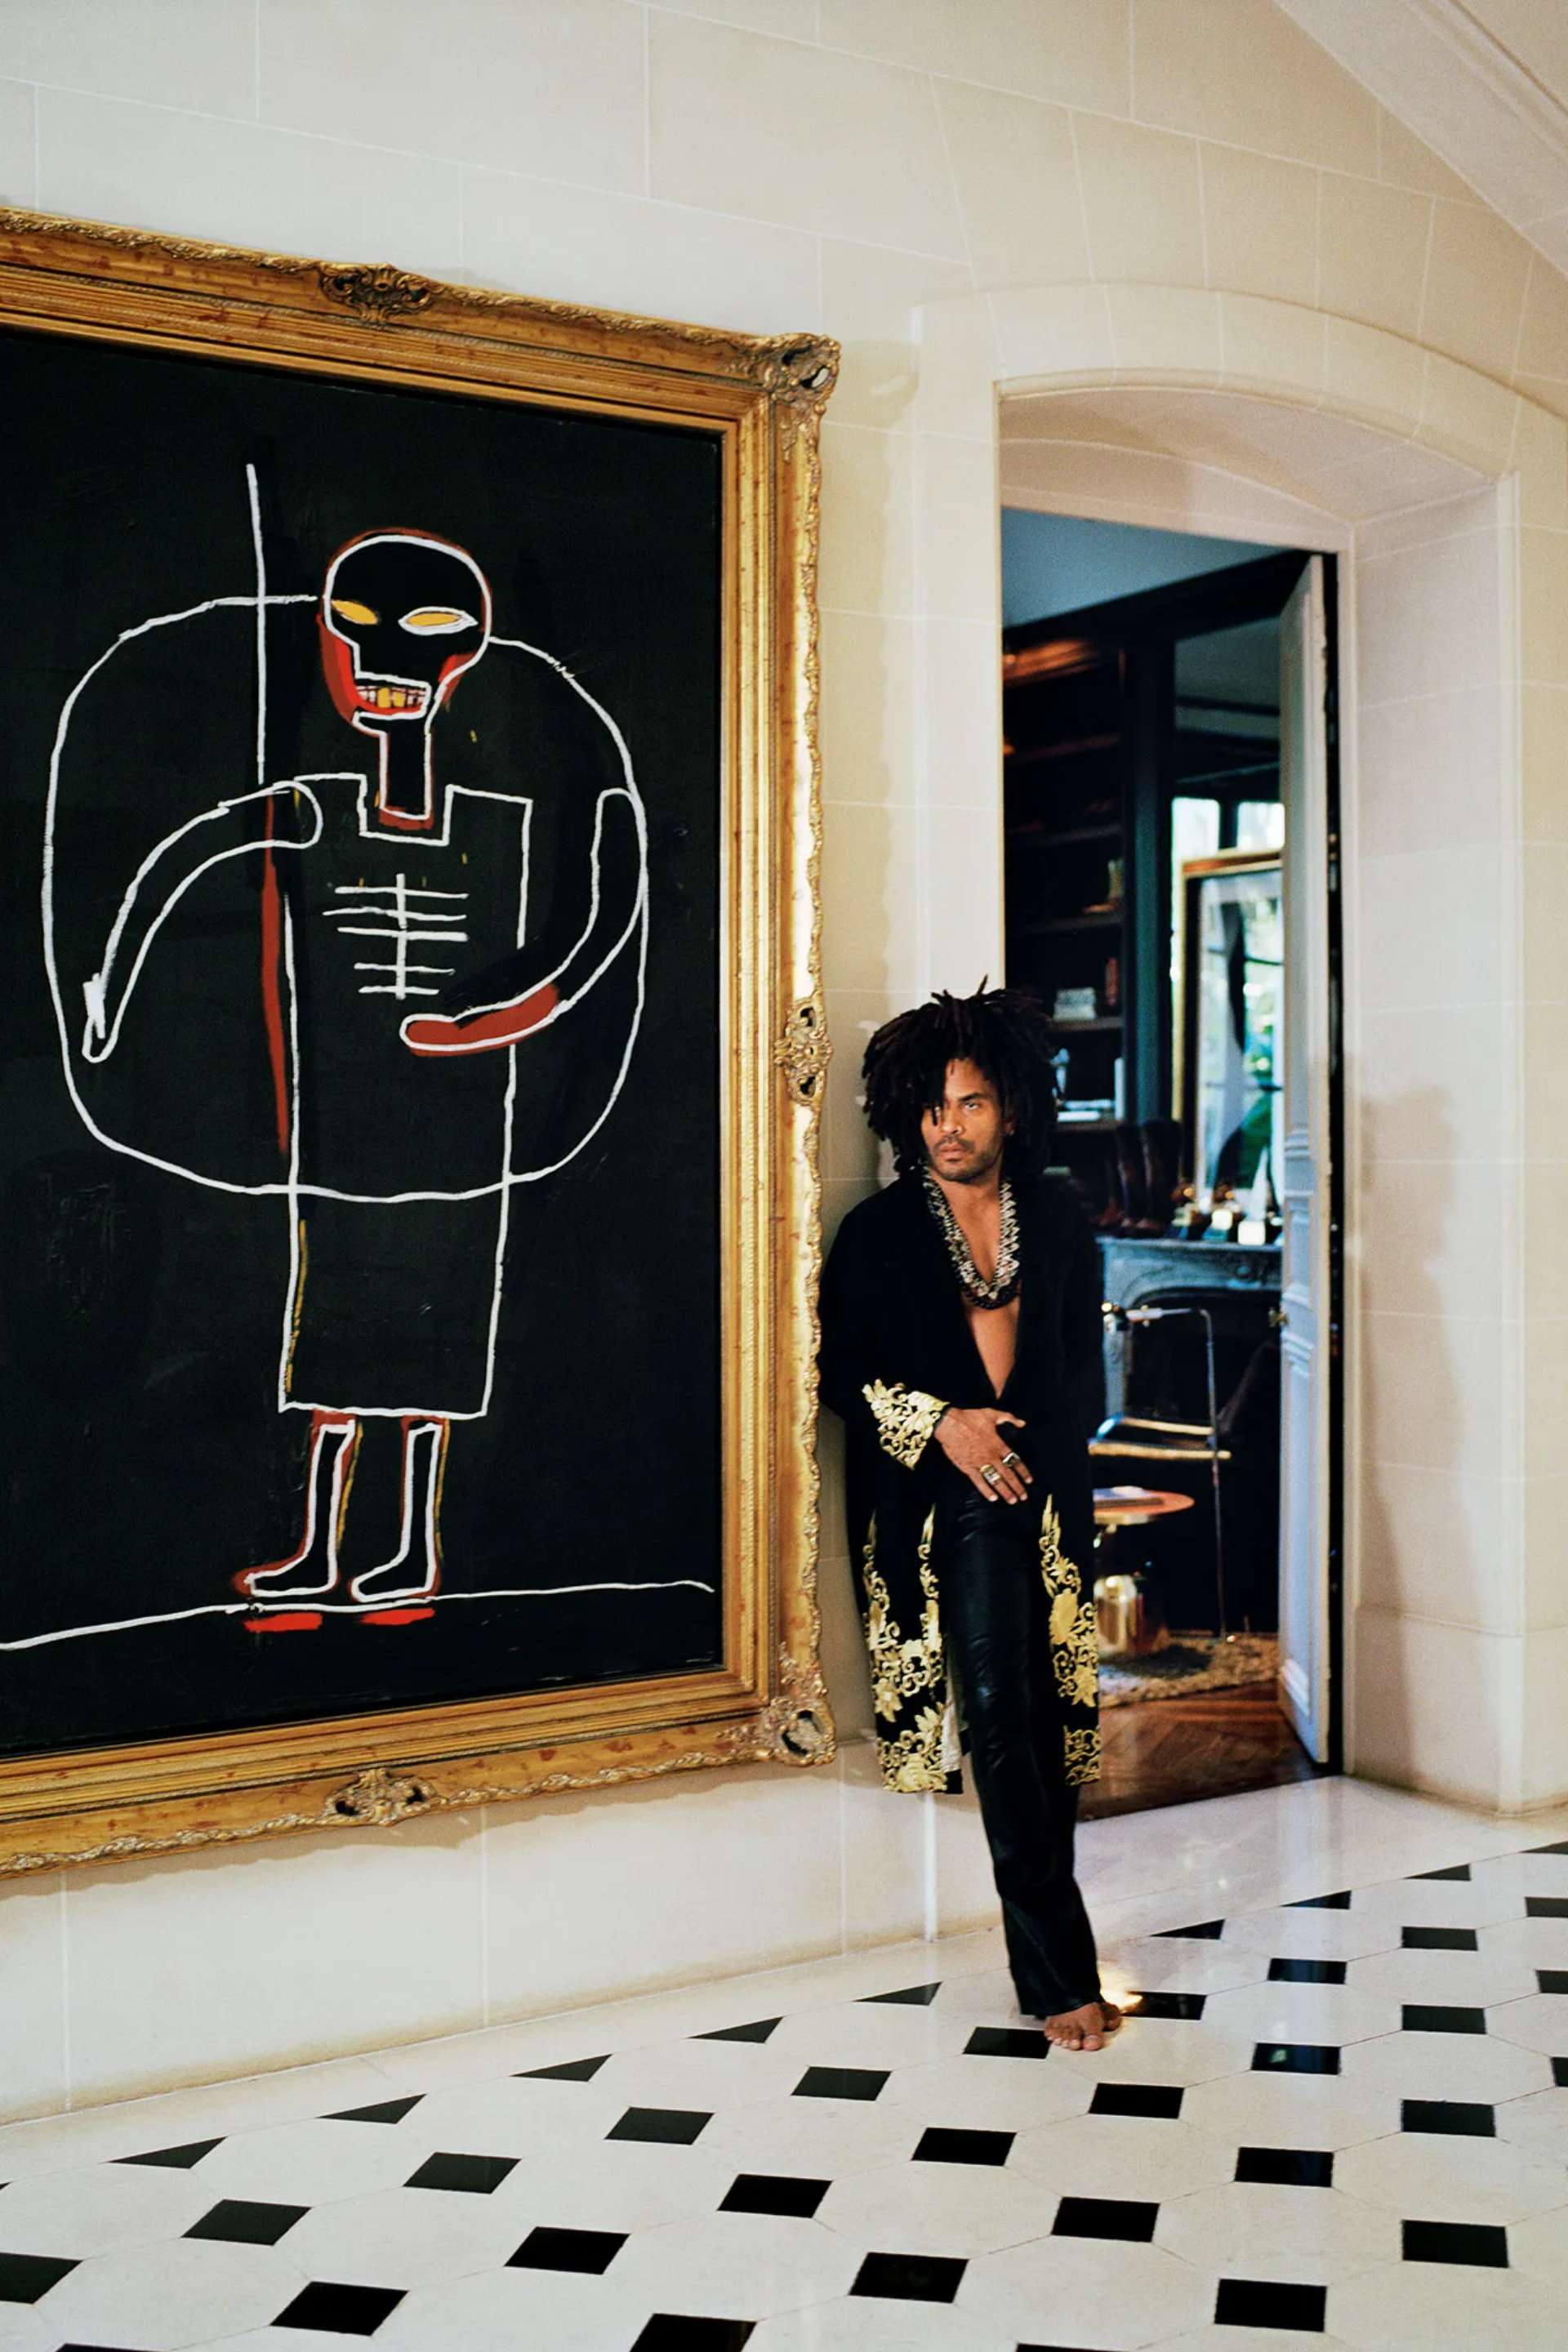 Lenny Kravitz standing next to a Jean-Michele Basquiat painting in his home.